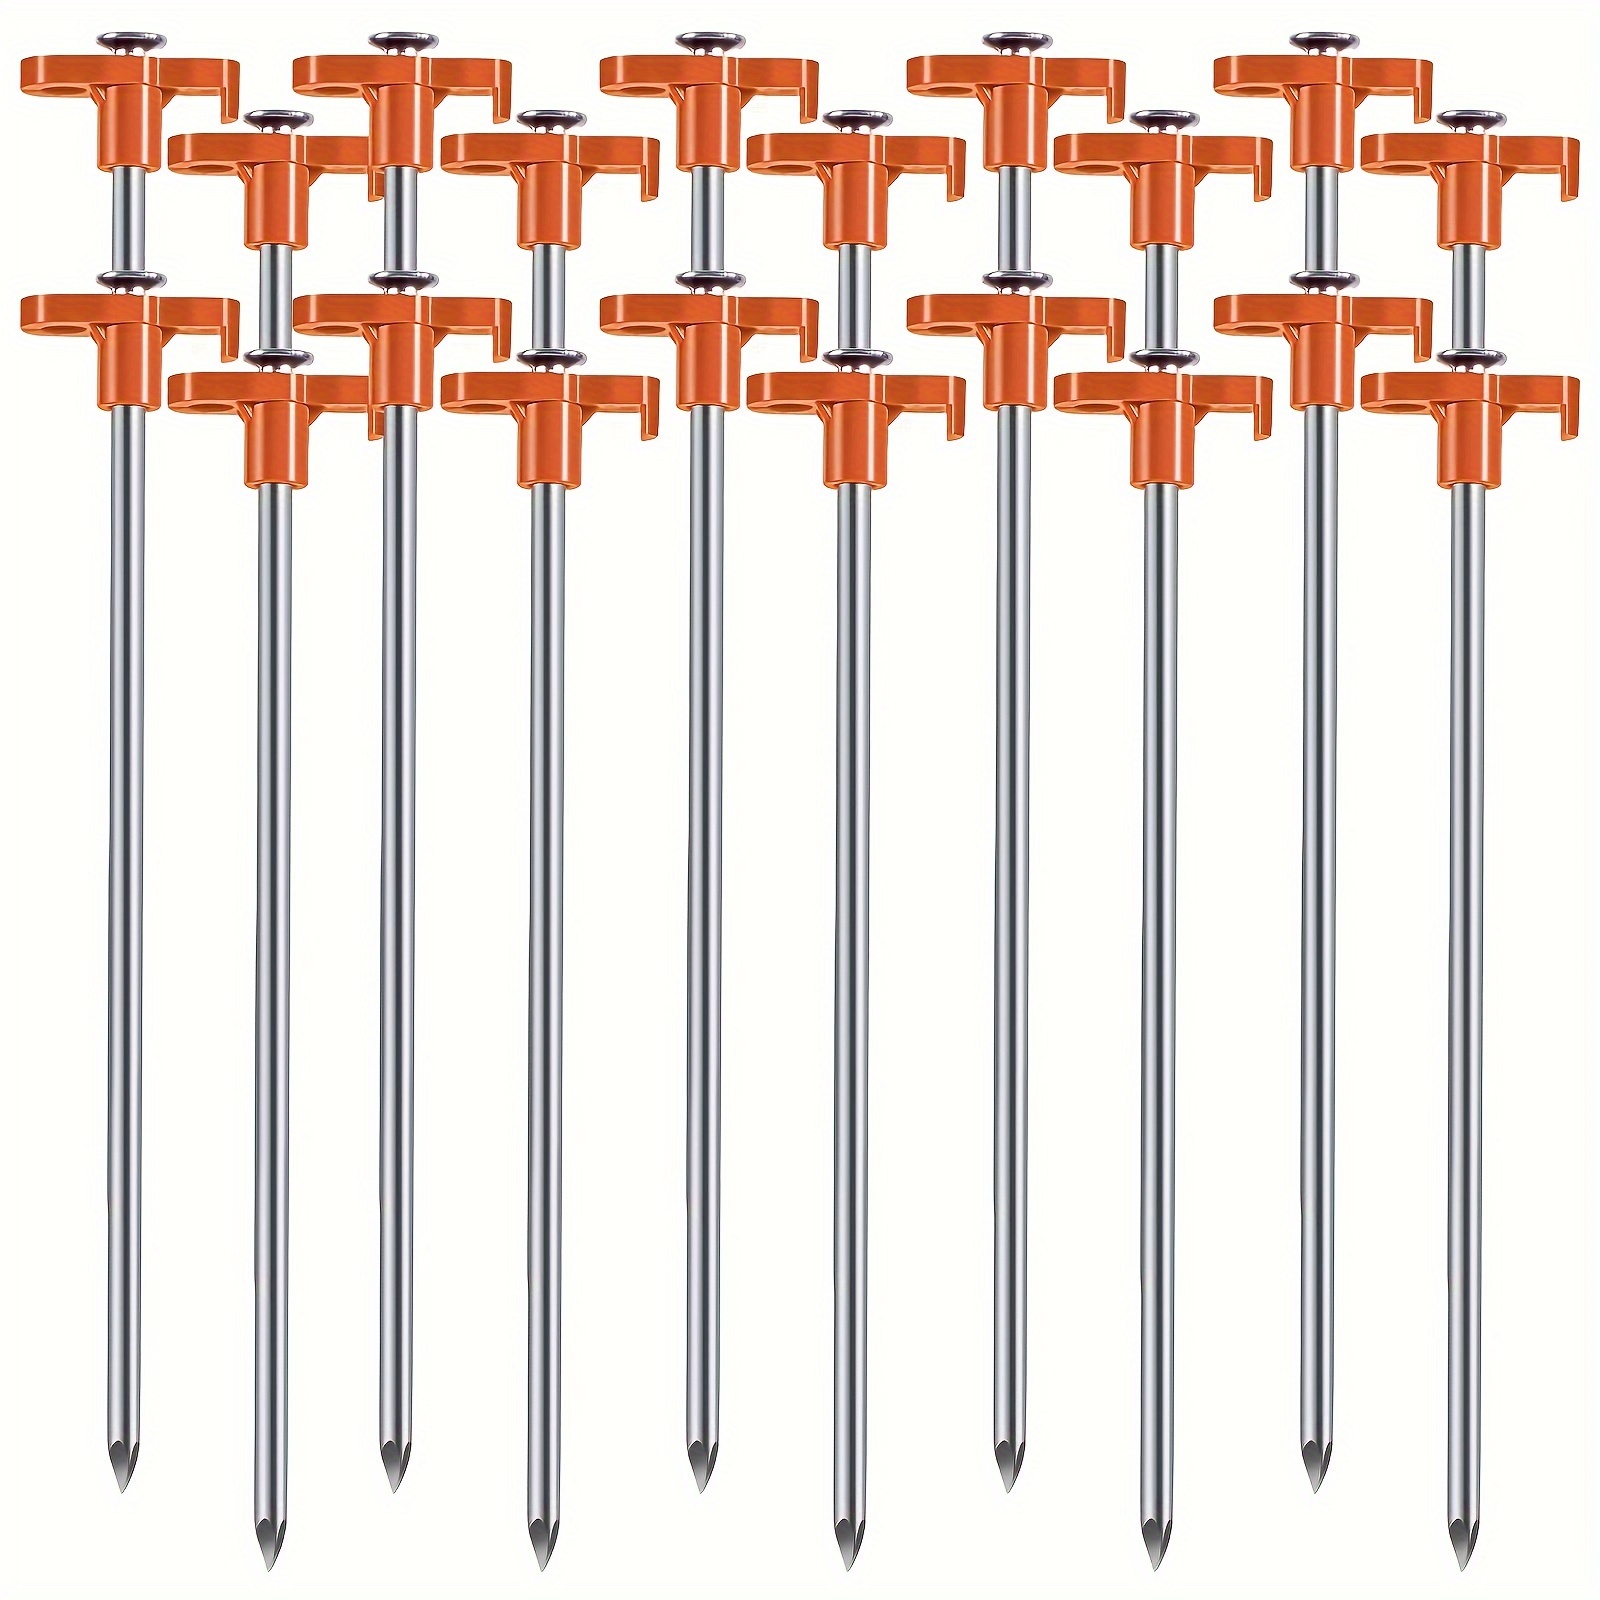 

10pcs Tent Stakes, Metal Tent Pegs, Professional Camping Tools For Outdoor Travel